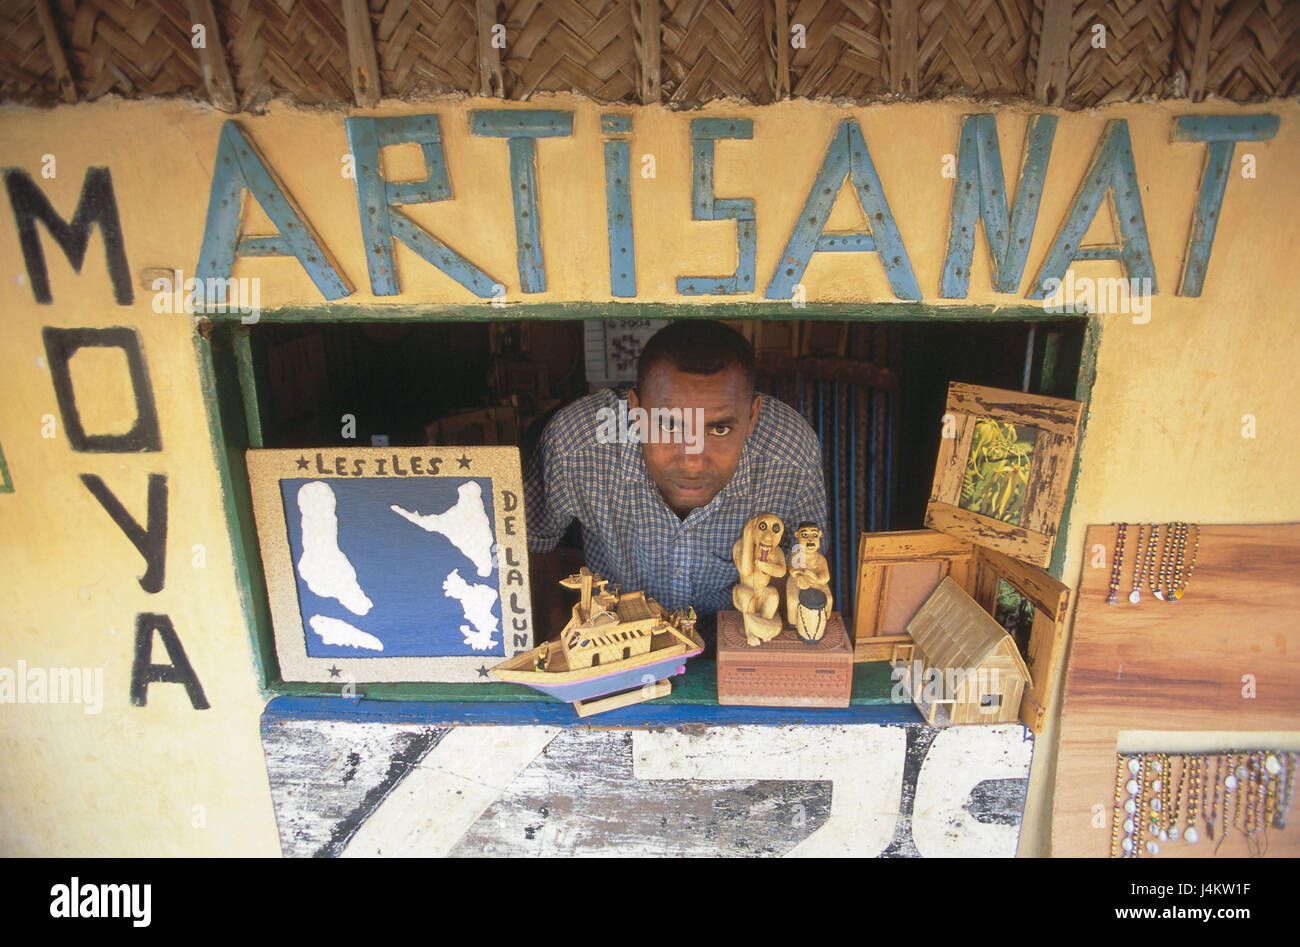 The Comoro Archipelago, island Anjouan, Moya, business, seller, souvenirs, no model release! Africa, Indian ocean, island state, Nzwani, economy, sales, souvenir sales, souvenir business, handicraft, man, non-white, swarthy, swarthy, local, view camera Stock Photo